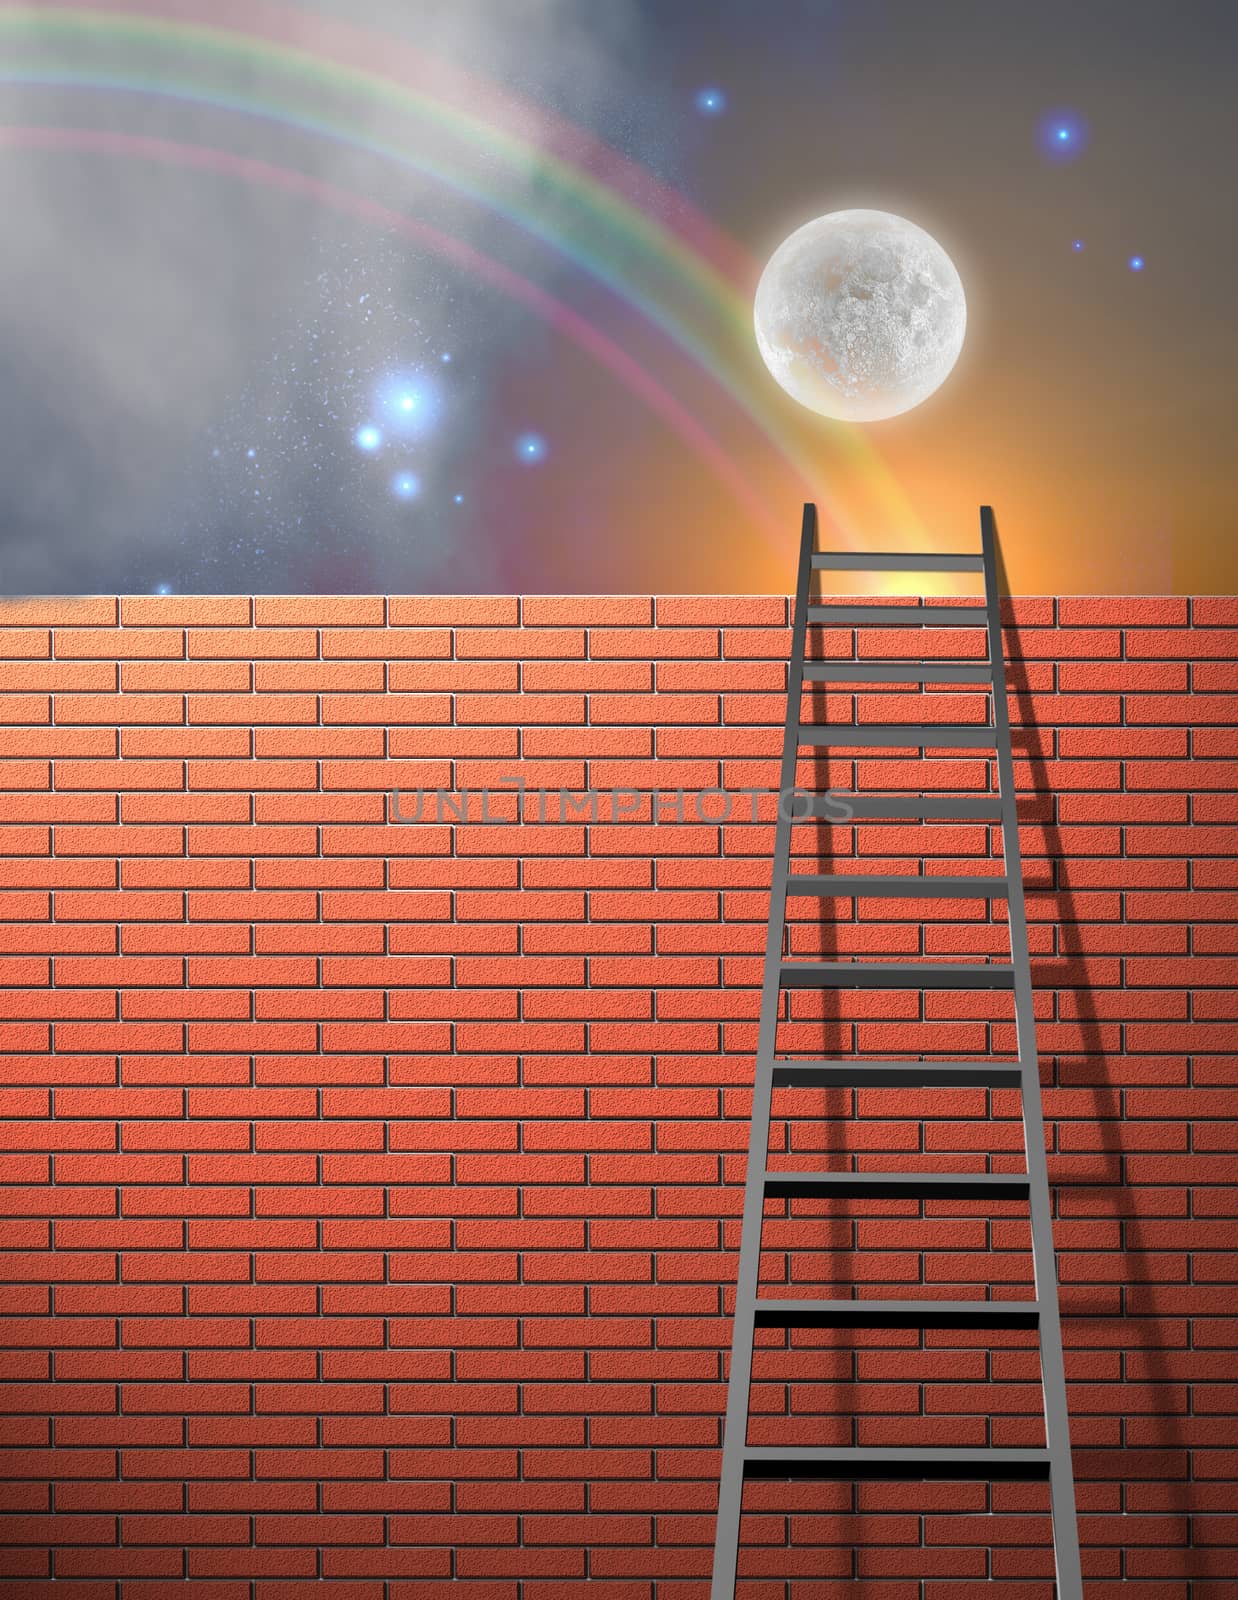 Ladder leans on wall. Vivid sky with rainbow and full moon